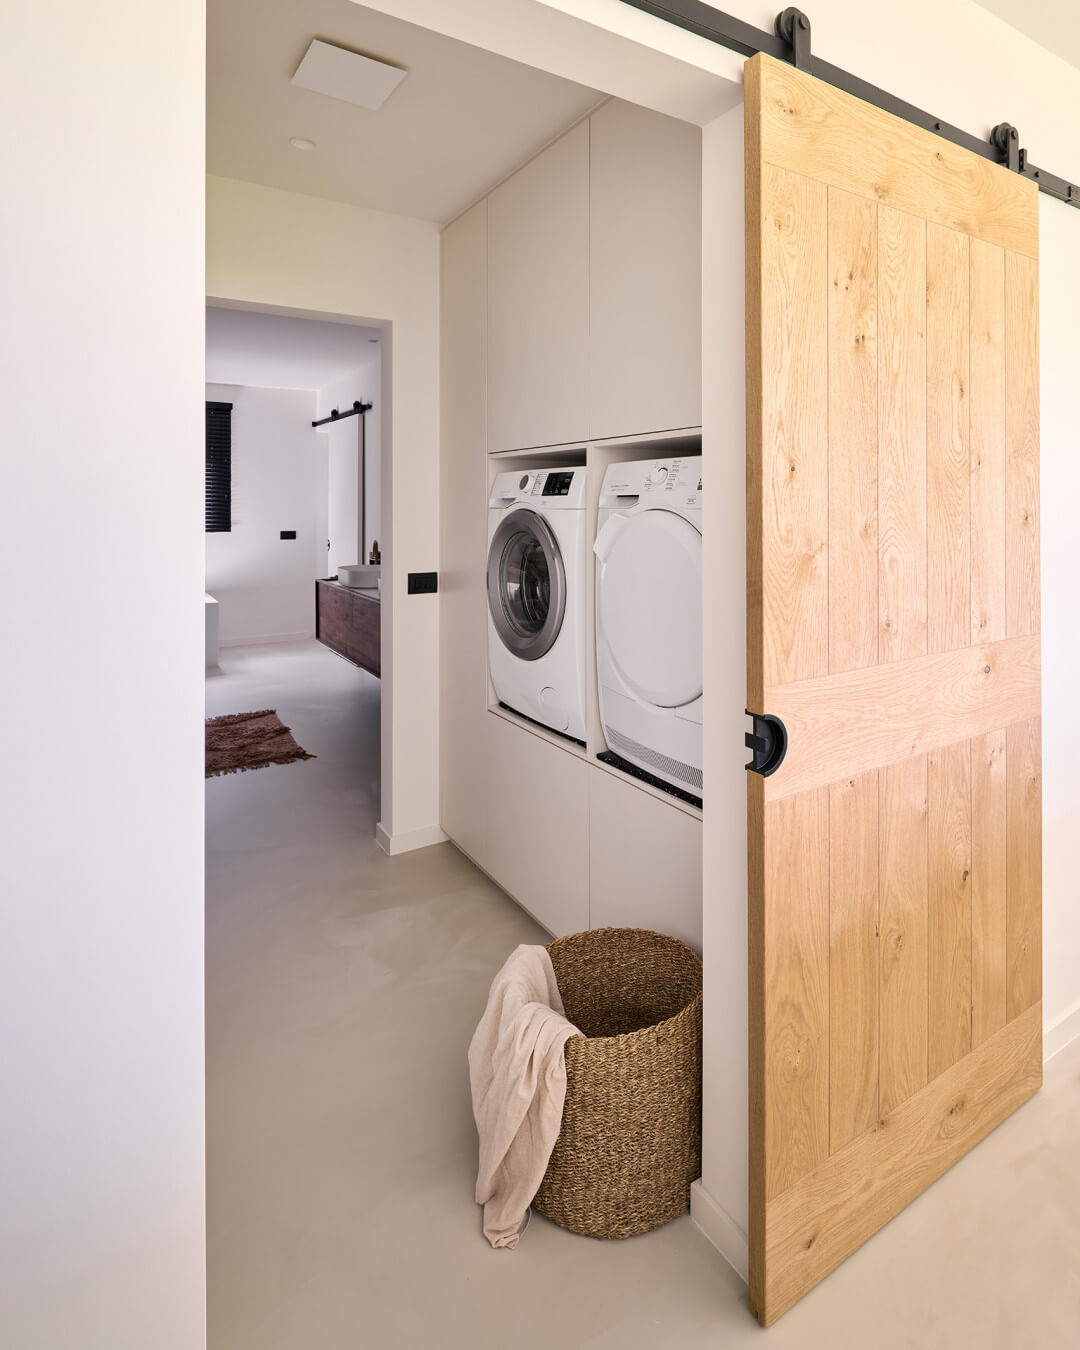 Custom laundry cabinet with built-in elevated washing appliances.